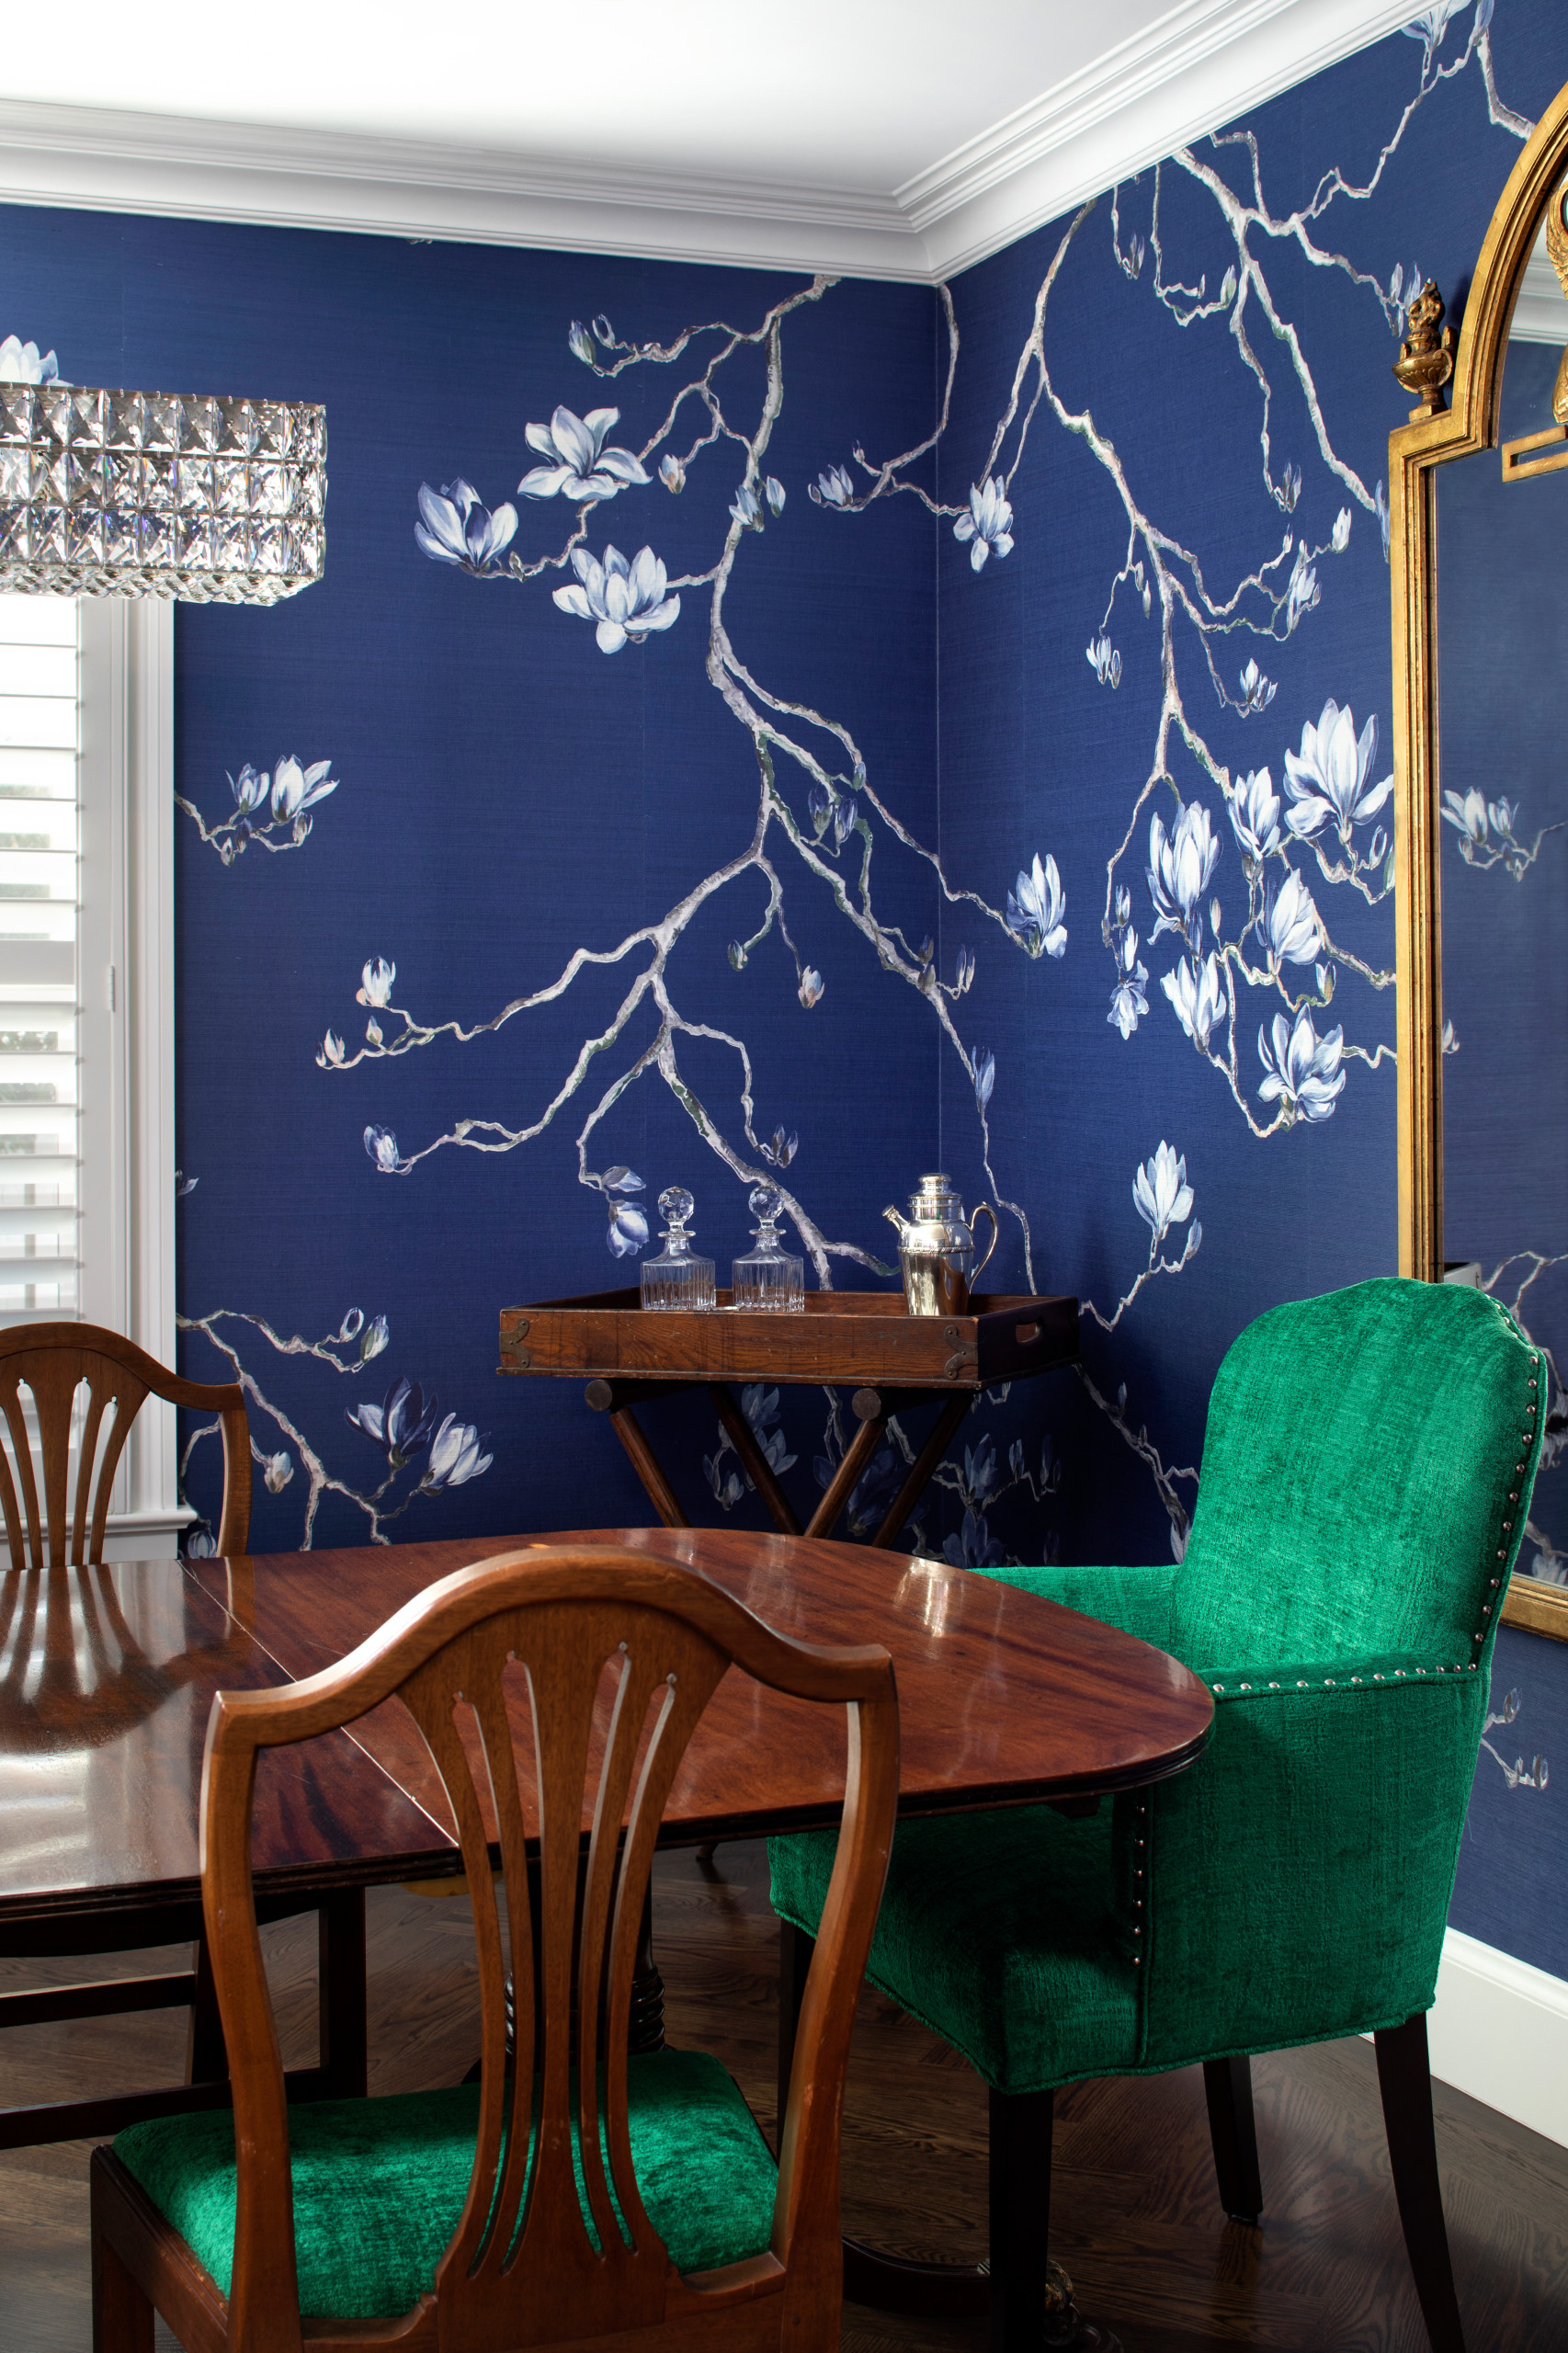 Colonial dining - Chinoiserie chic